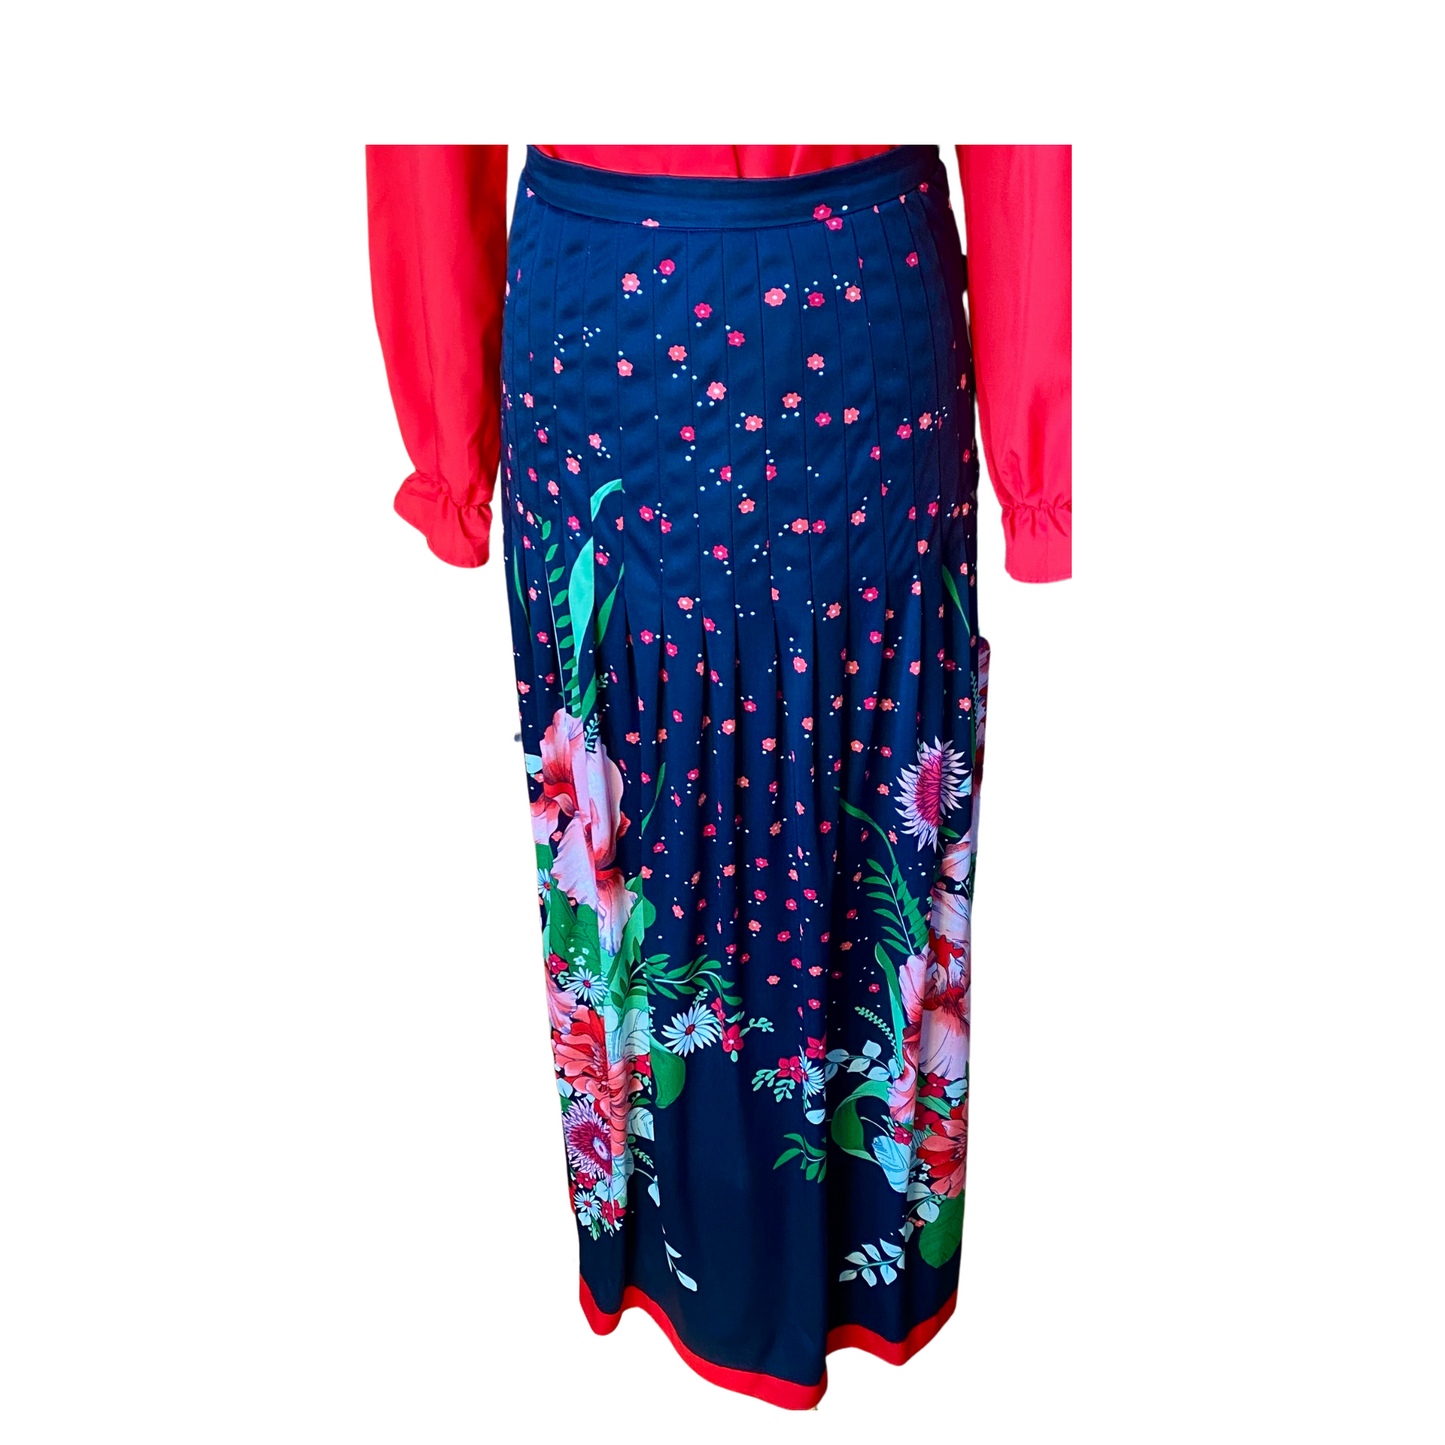 Full length black vintage skirt with bold floral design in pink, red, green and white. 